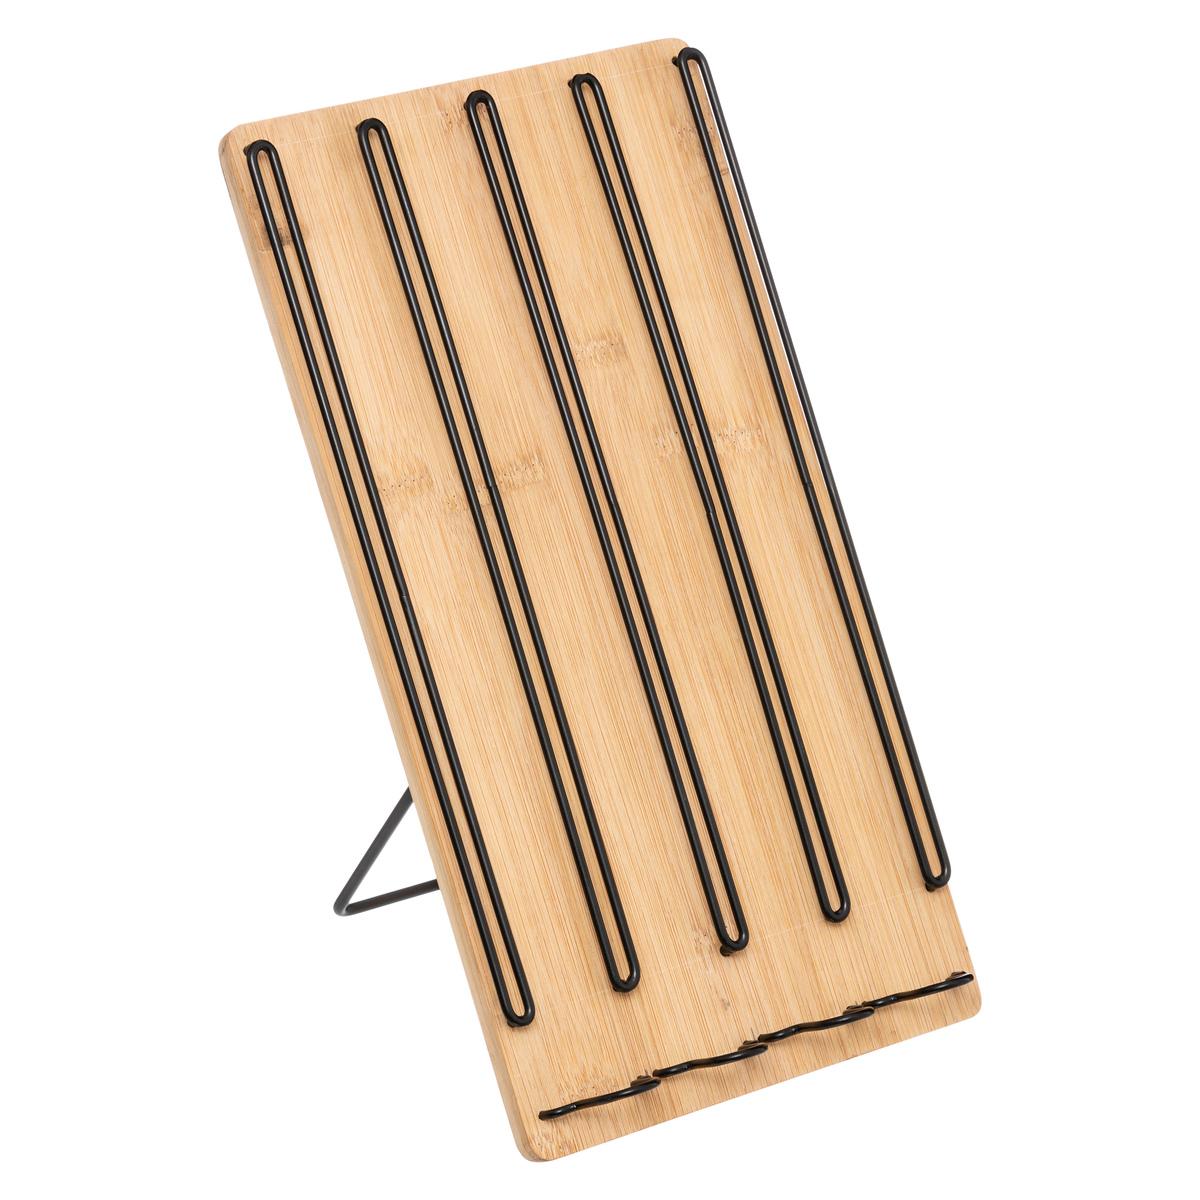 5 Five Simply Smart Decorative Bamboo Board And Metal Base 1×5